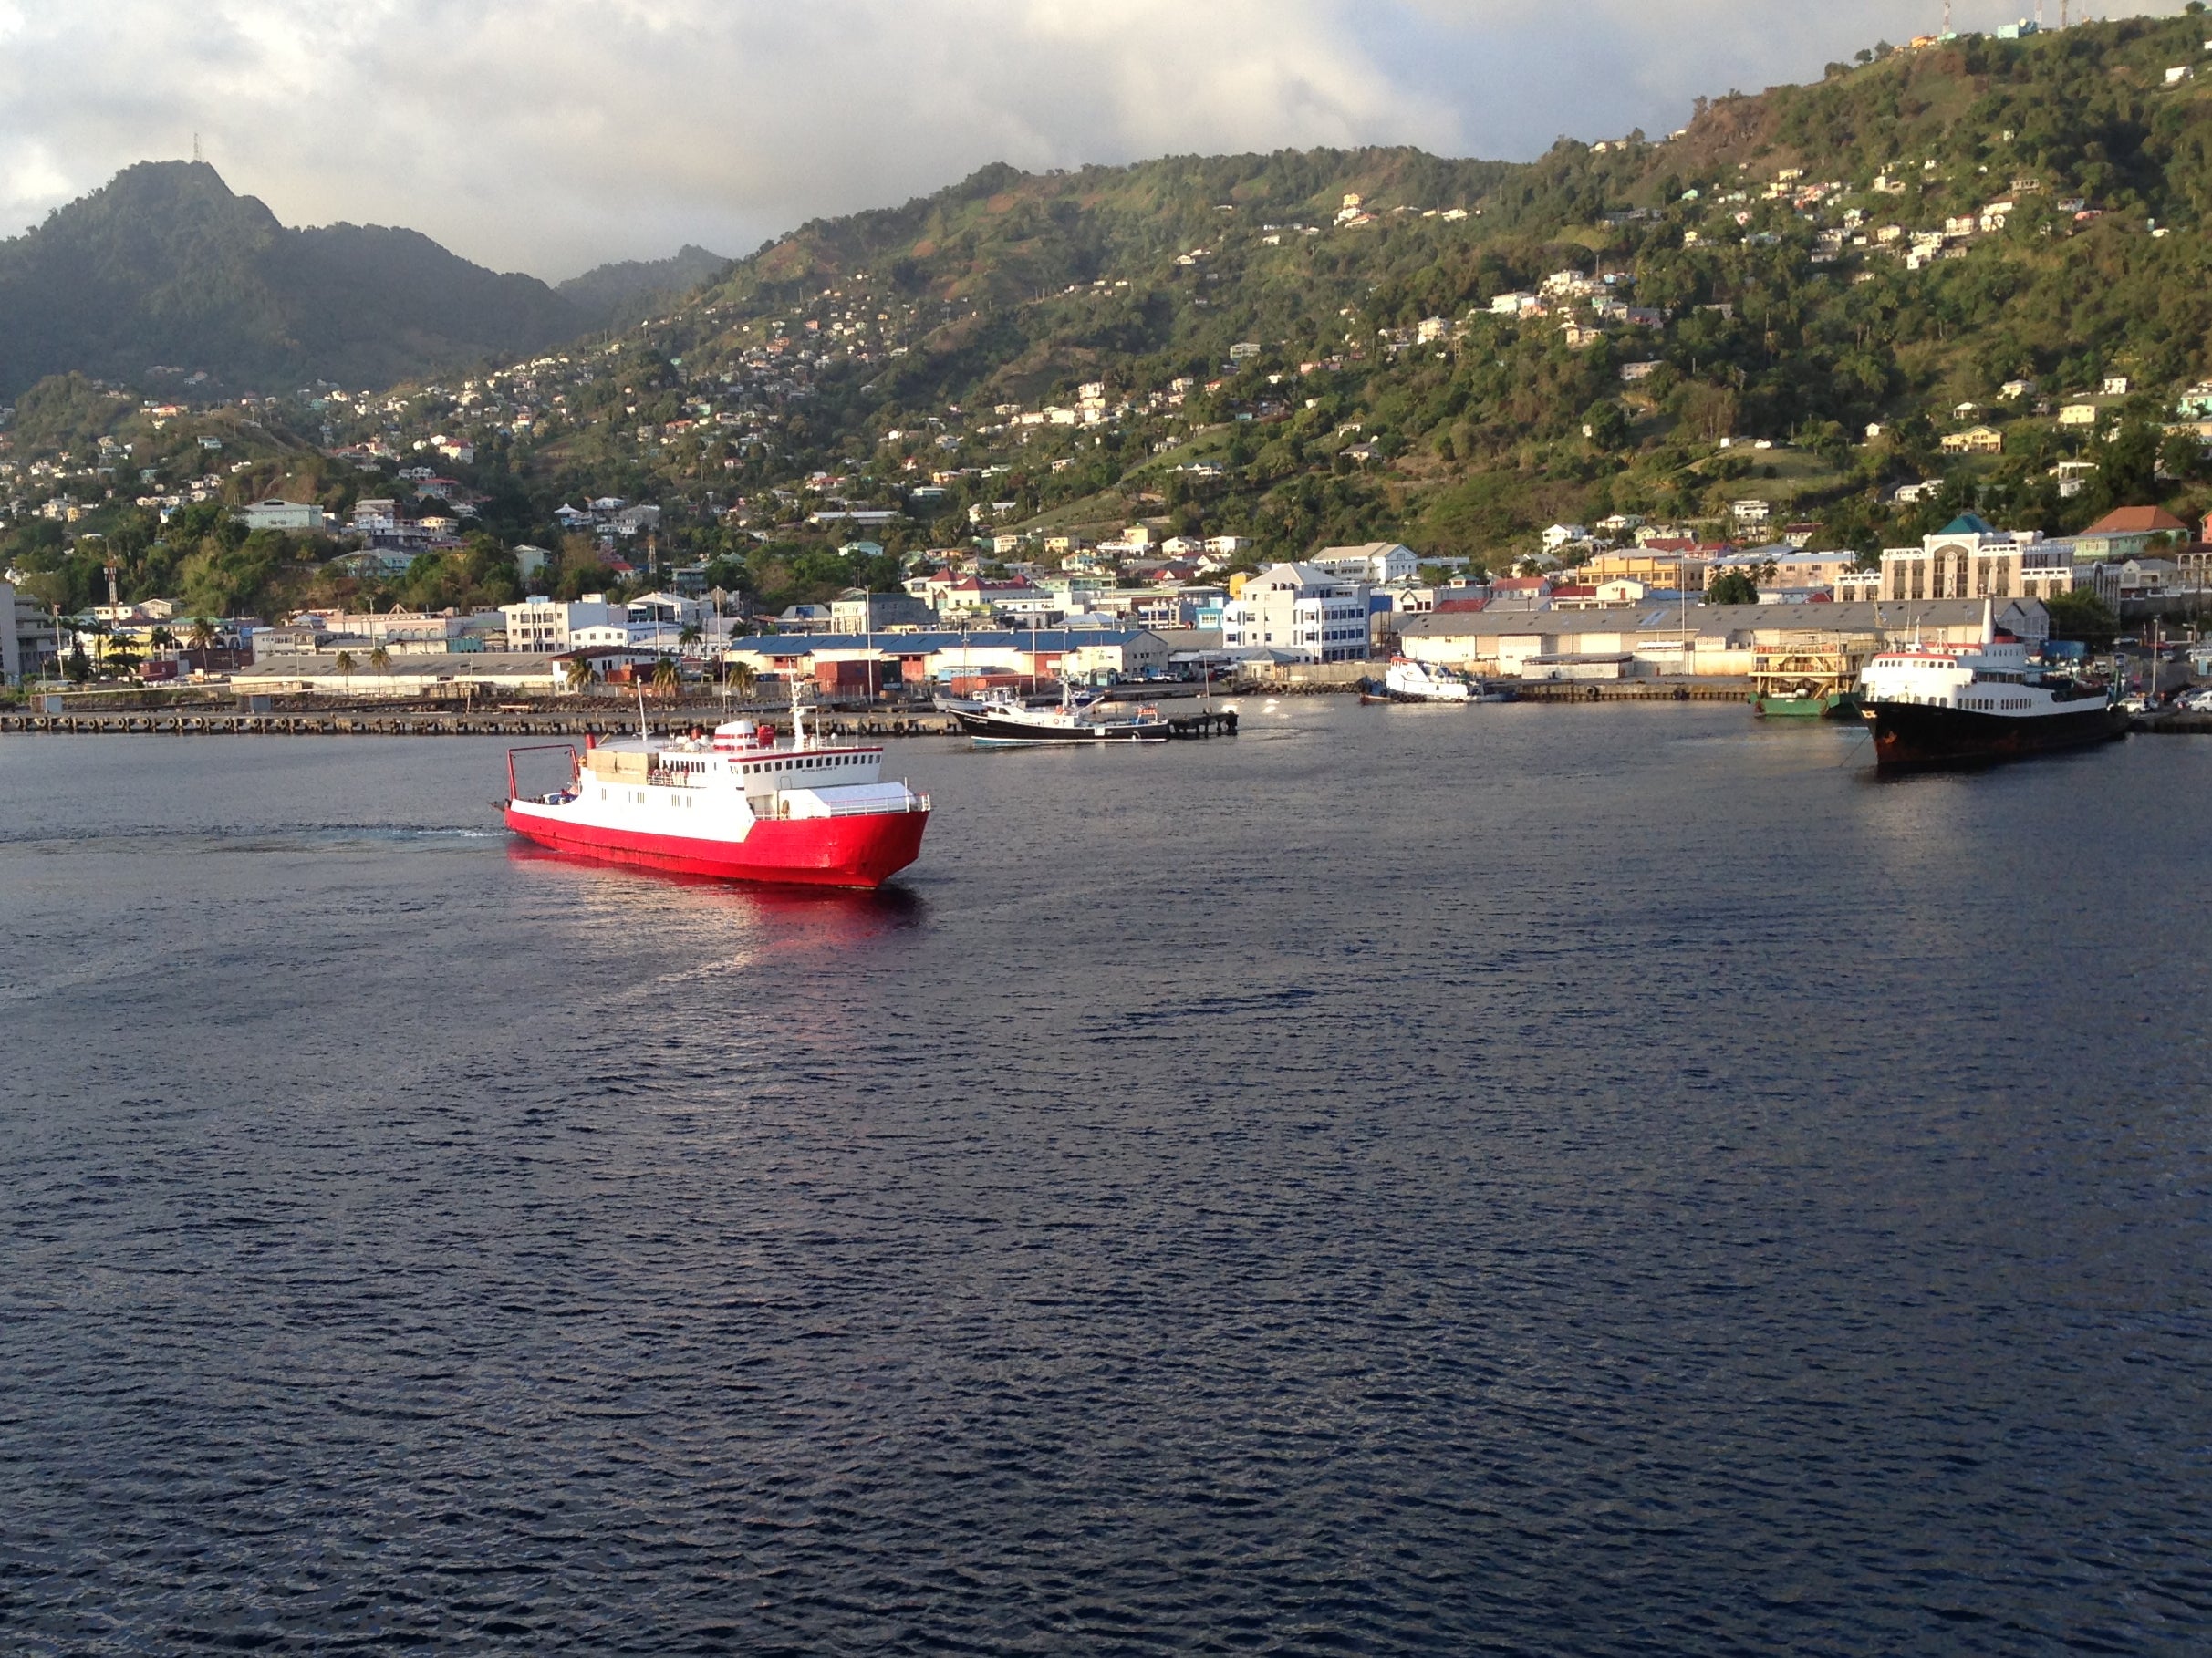 Bequia is part of St Vincent and the Grenadines in the Caribbean